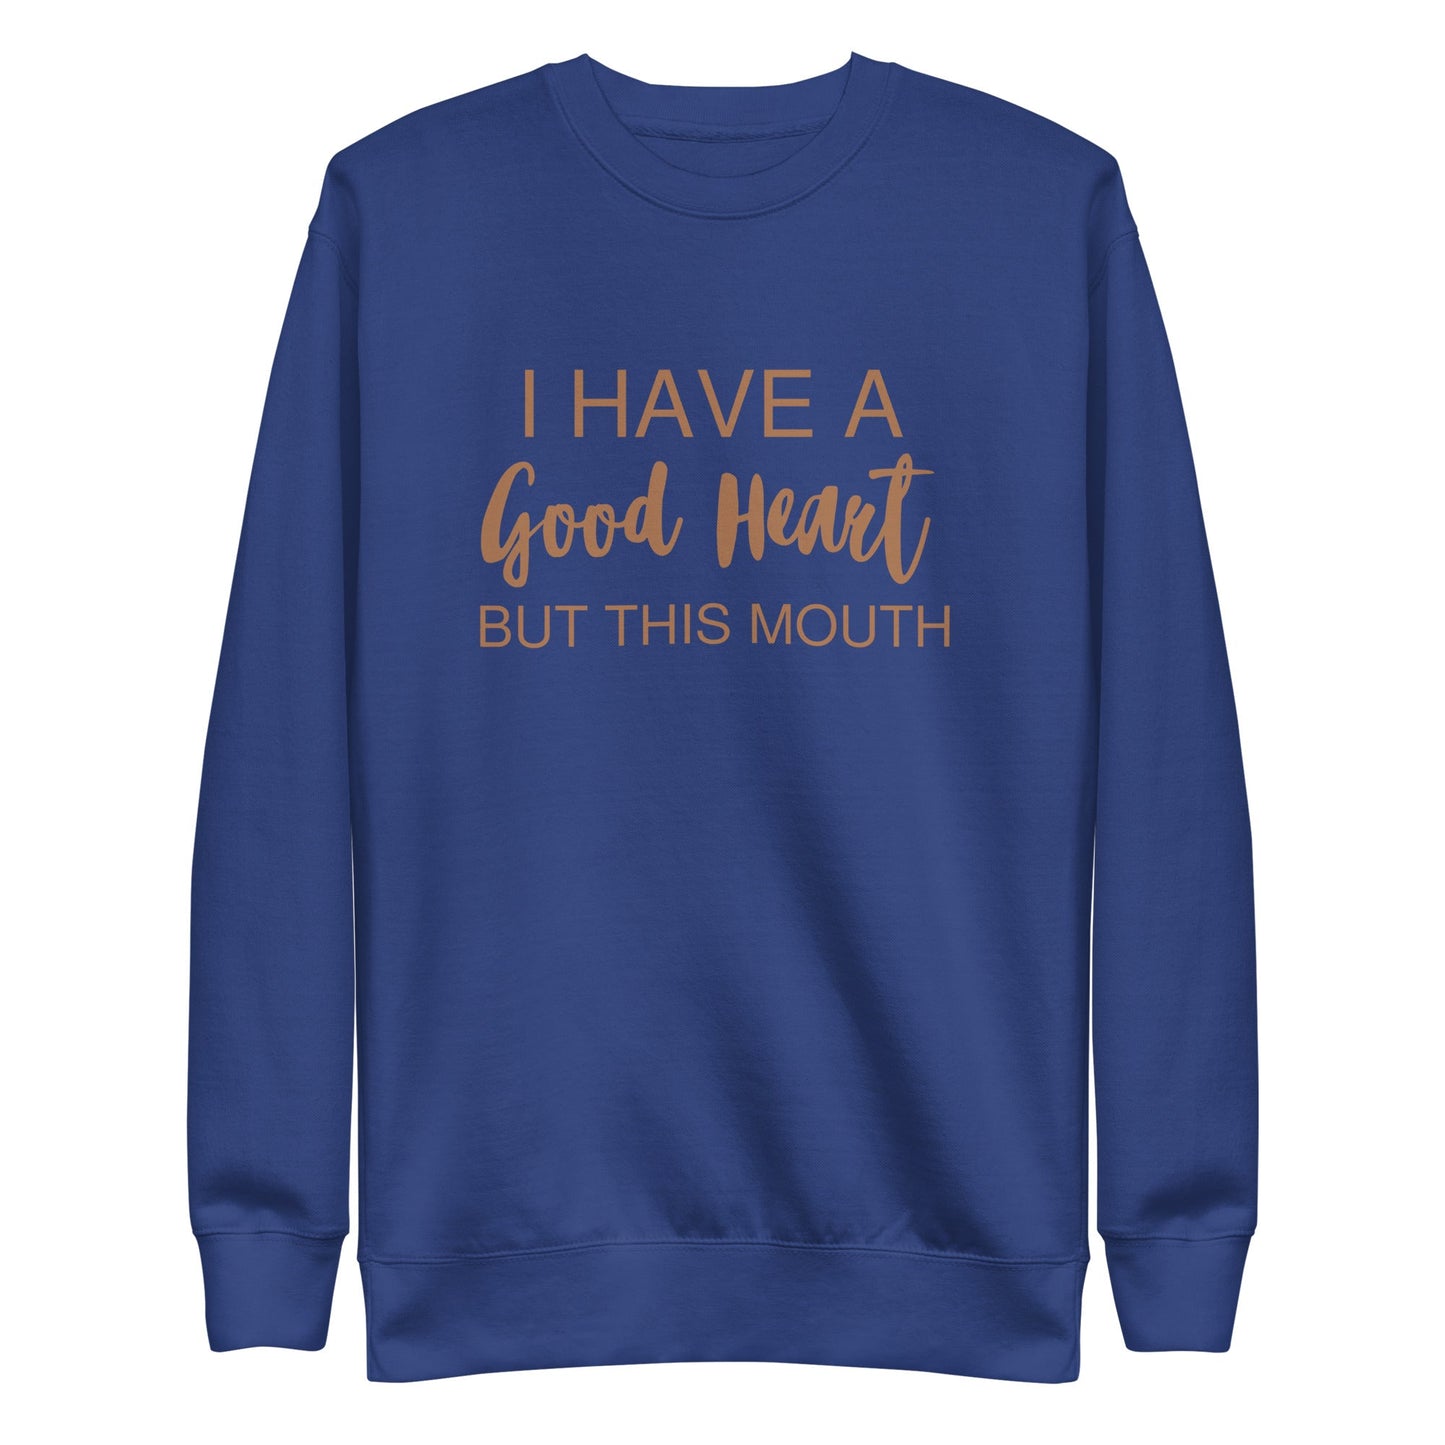 I Have A Good Heart But This Mouth Unisex Premium Sweatshirt - Catch This Tea Shirts